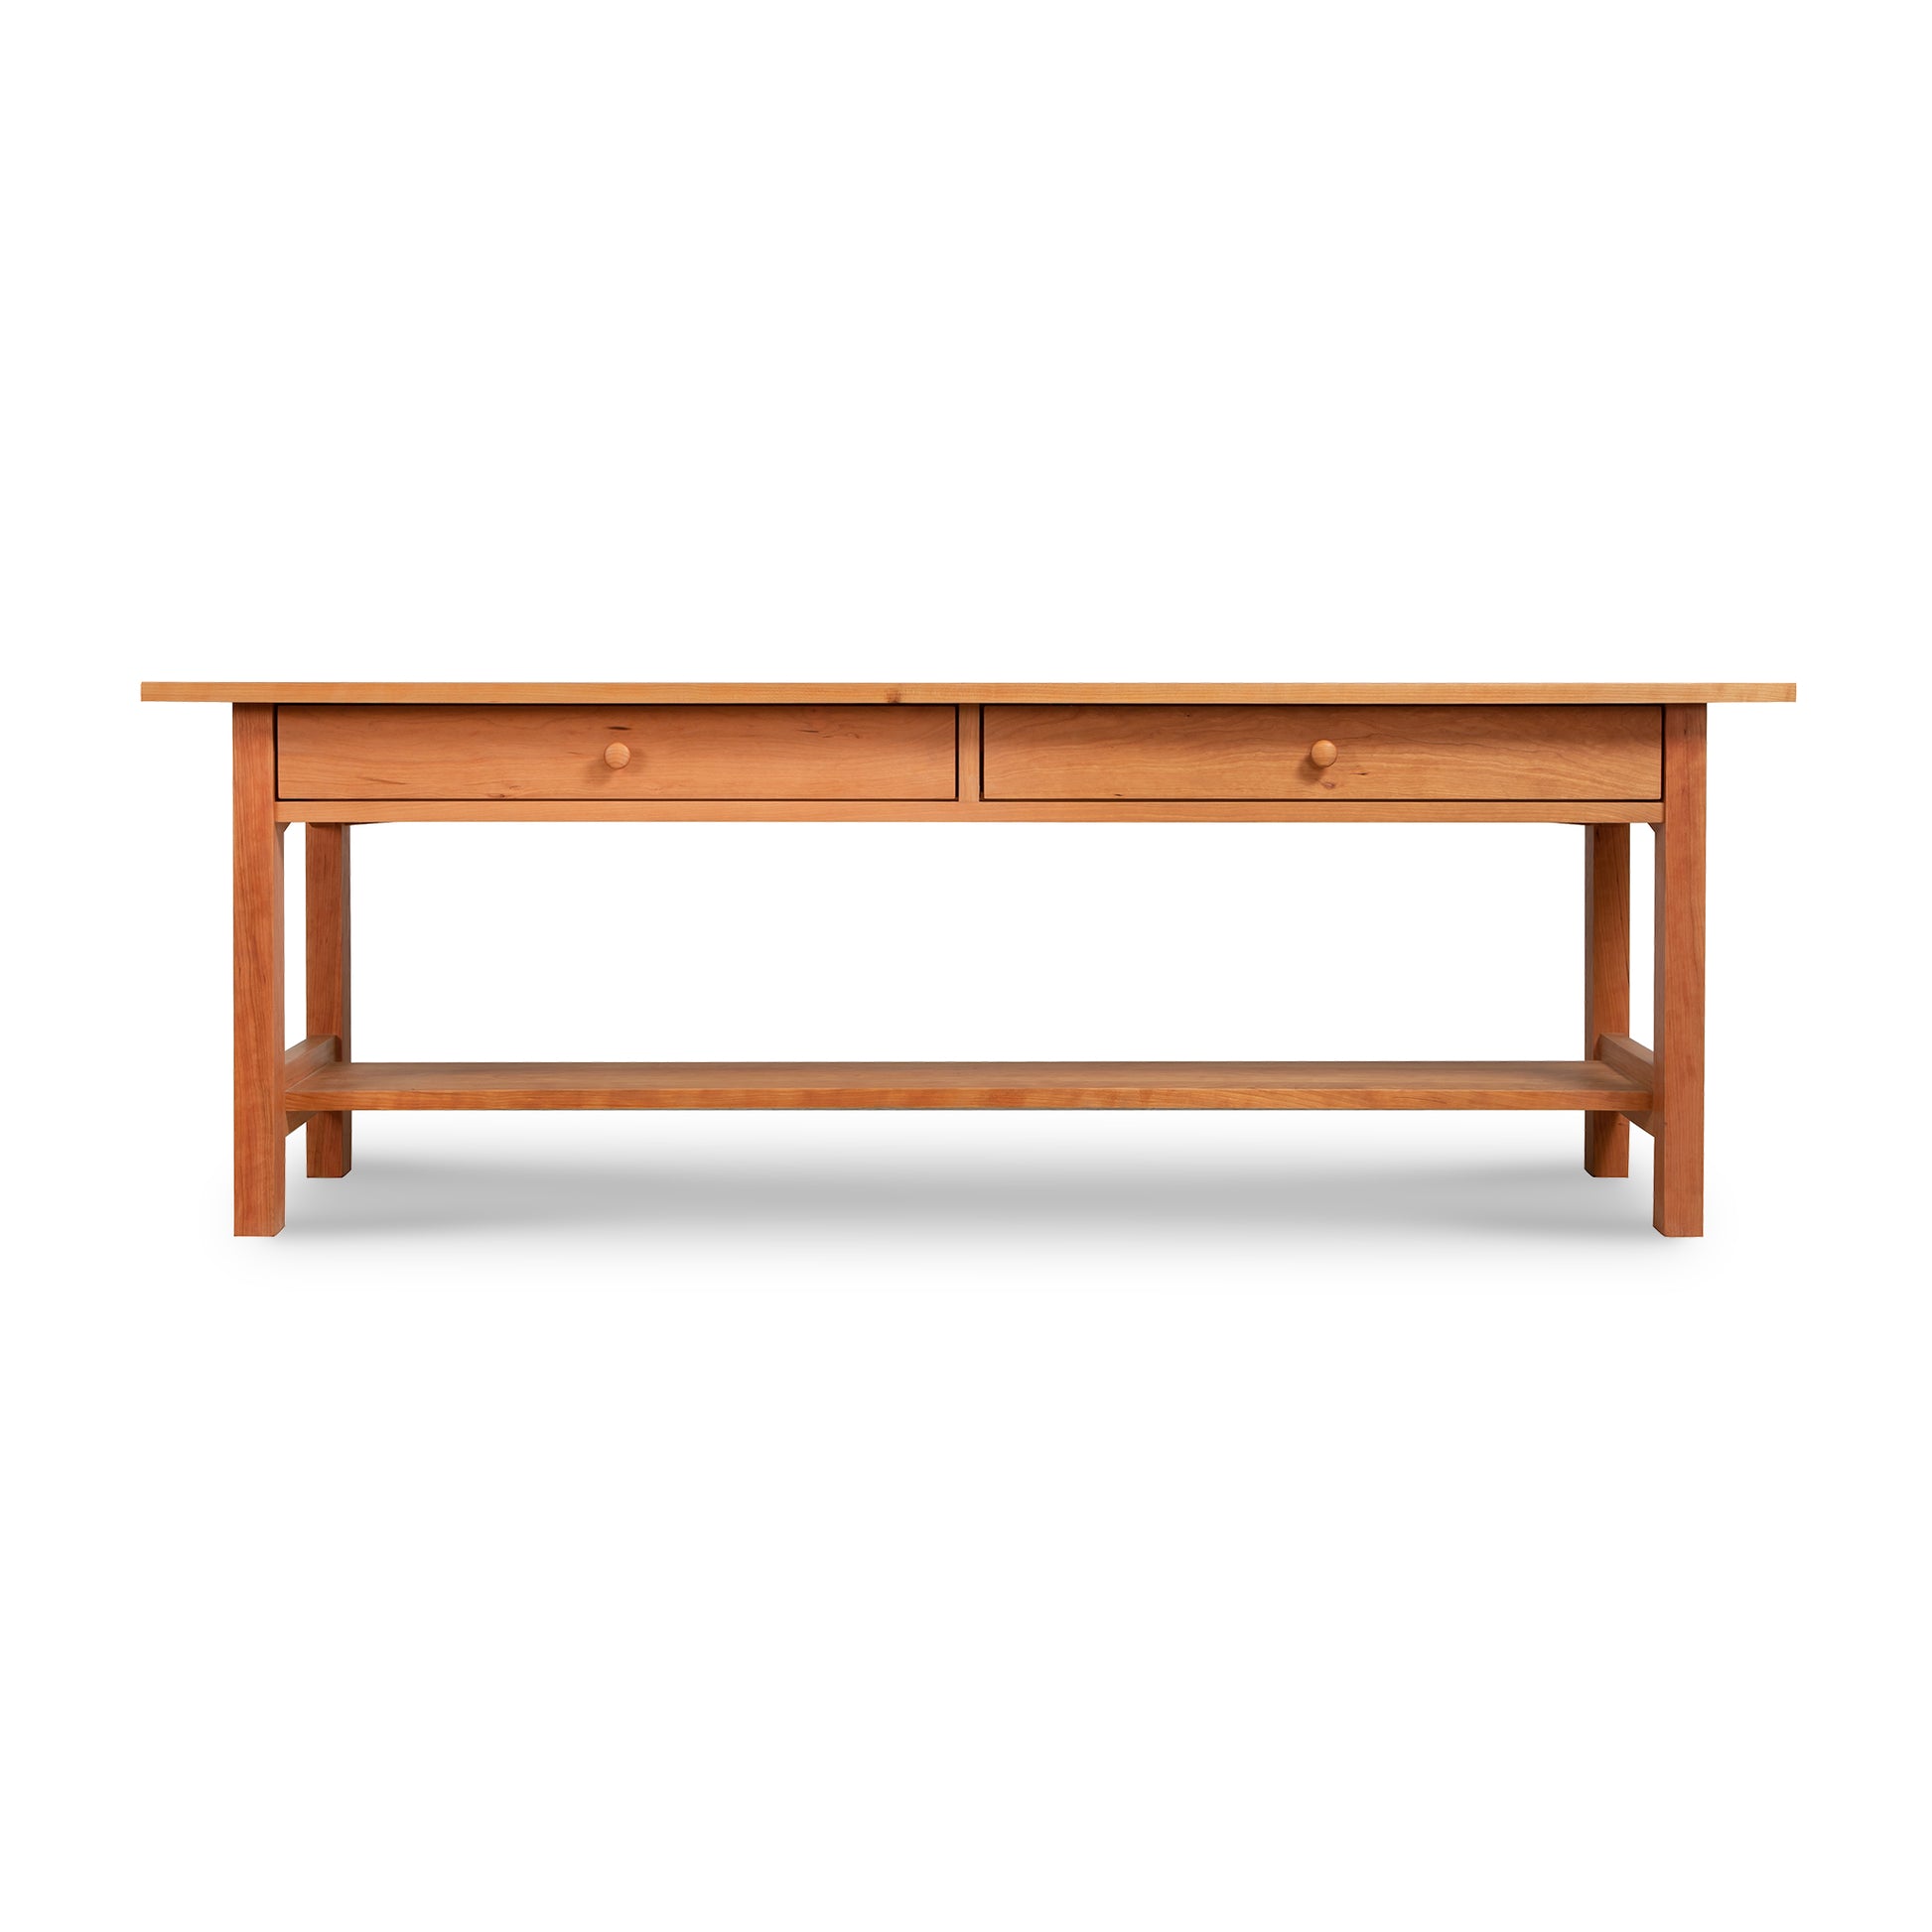 A Vermont Furniture Designs Burlington Shaker 2-Drawer Coffee Table, set against a white background.